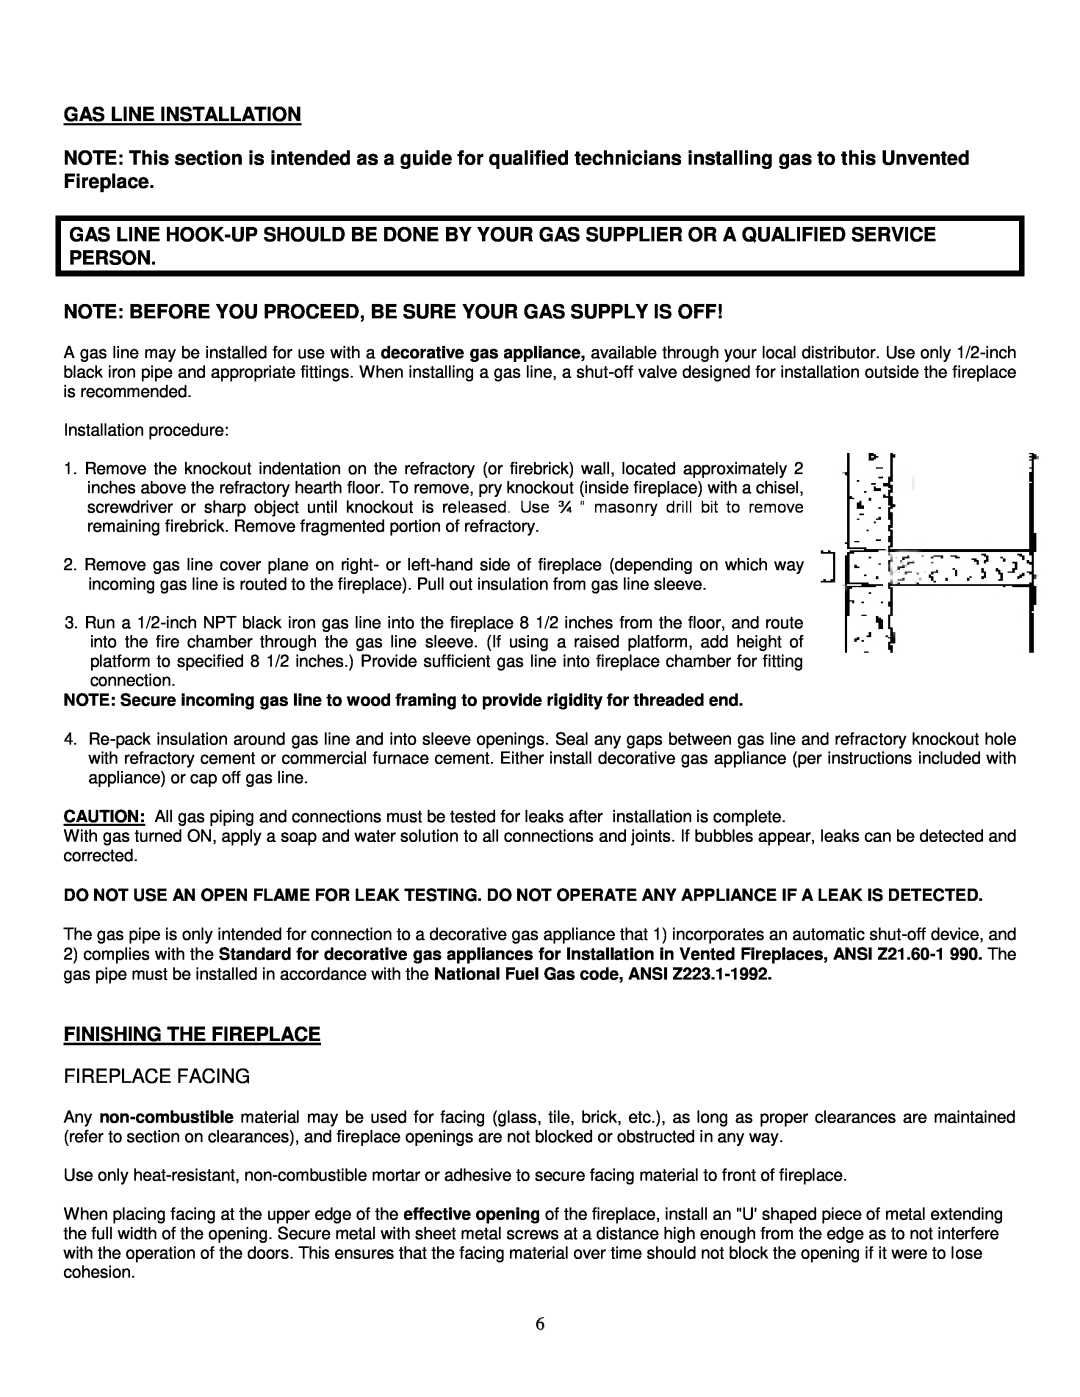 Southwest Specialty Products 48, 42, 36 installation instructions Gas Line Installation 